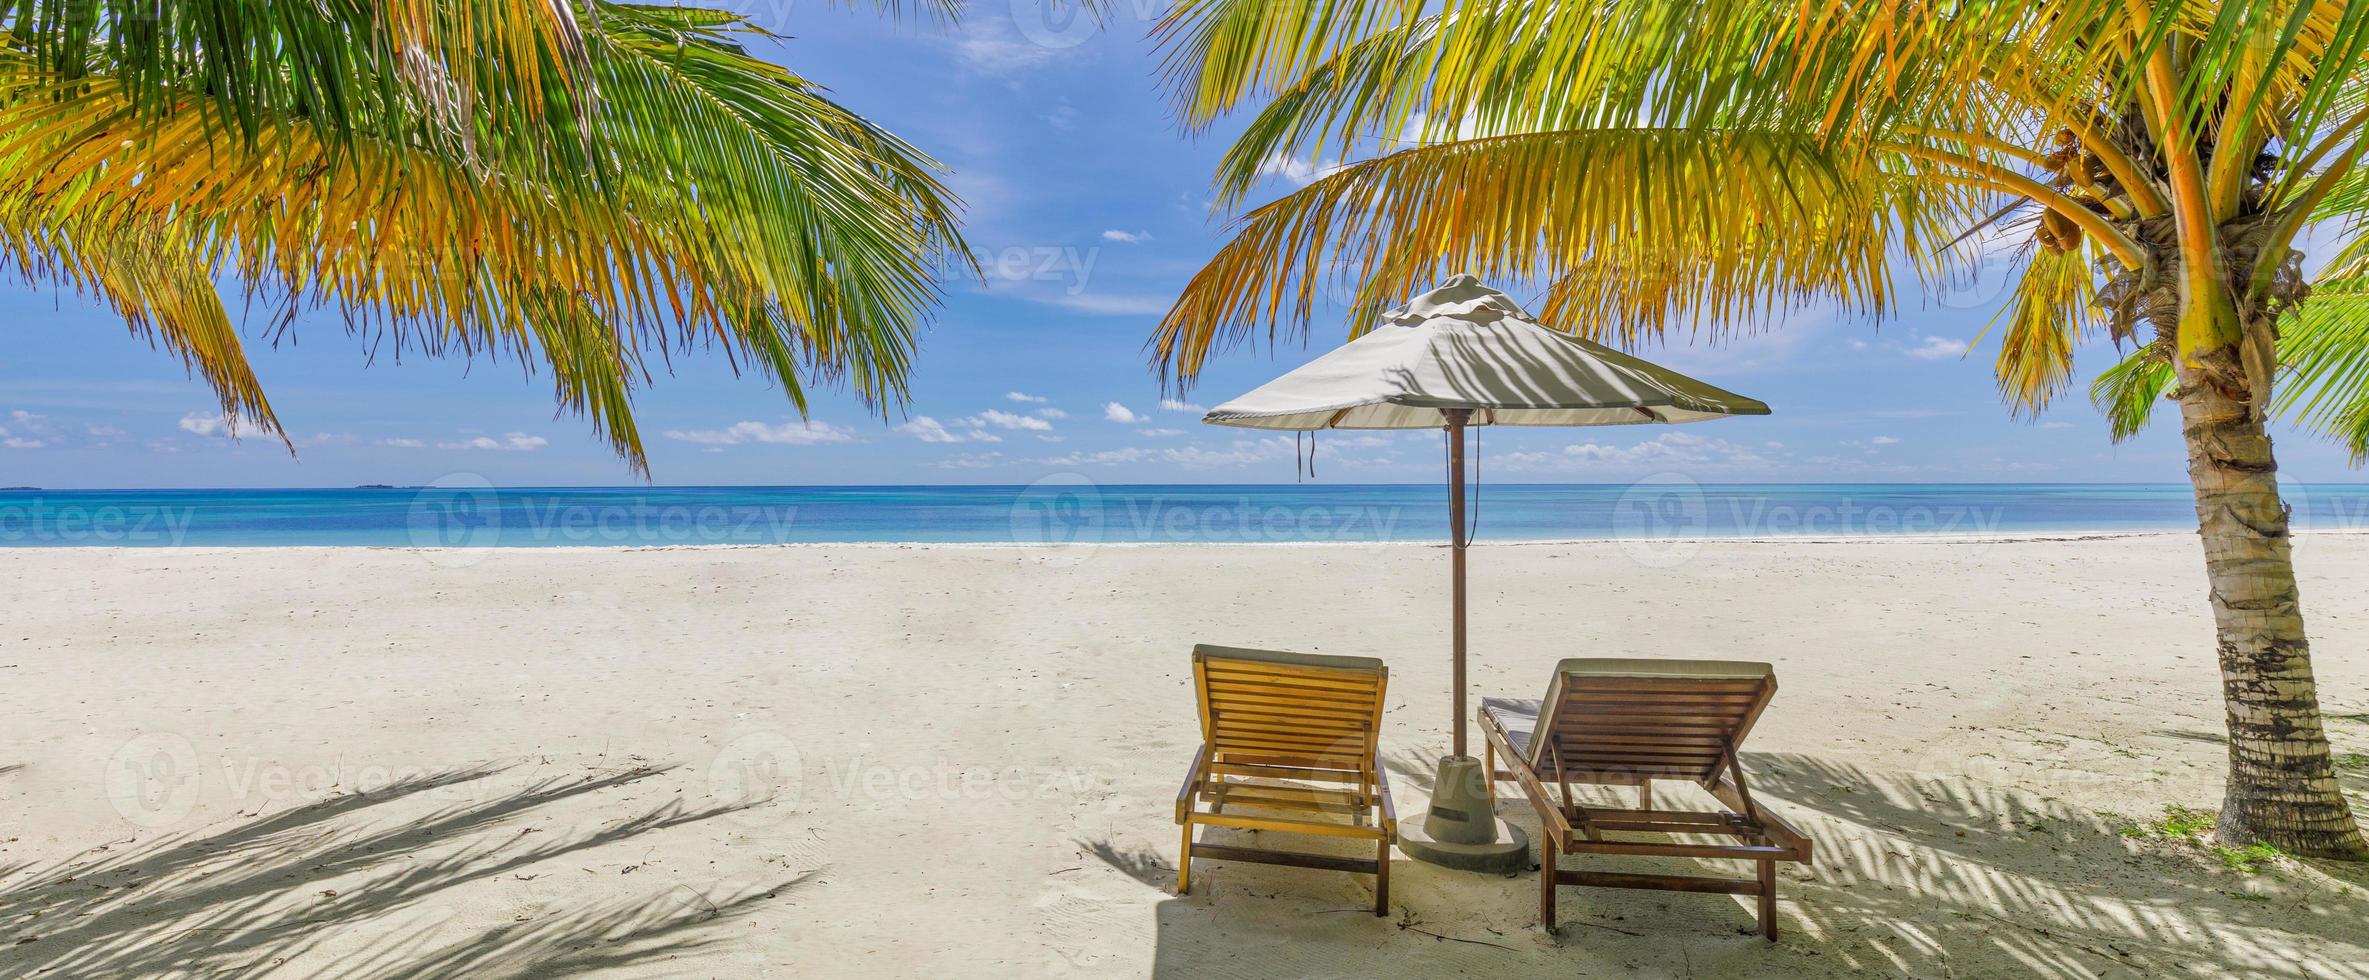 Amazing vacation beach. Couple chairs together by the sea banner. Summer romantic holiday honeymoon concept. Tropical island landscape. Tranquil shore panorama, relax sand seaside horizon, palm leaves photo